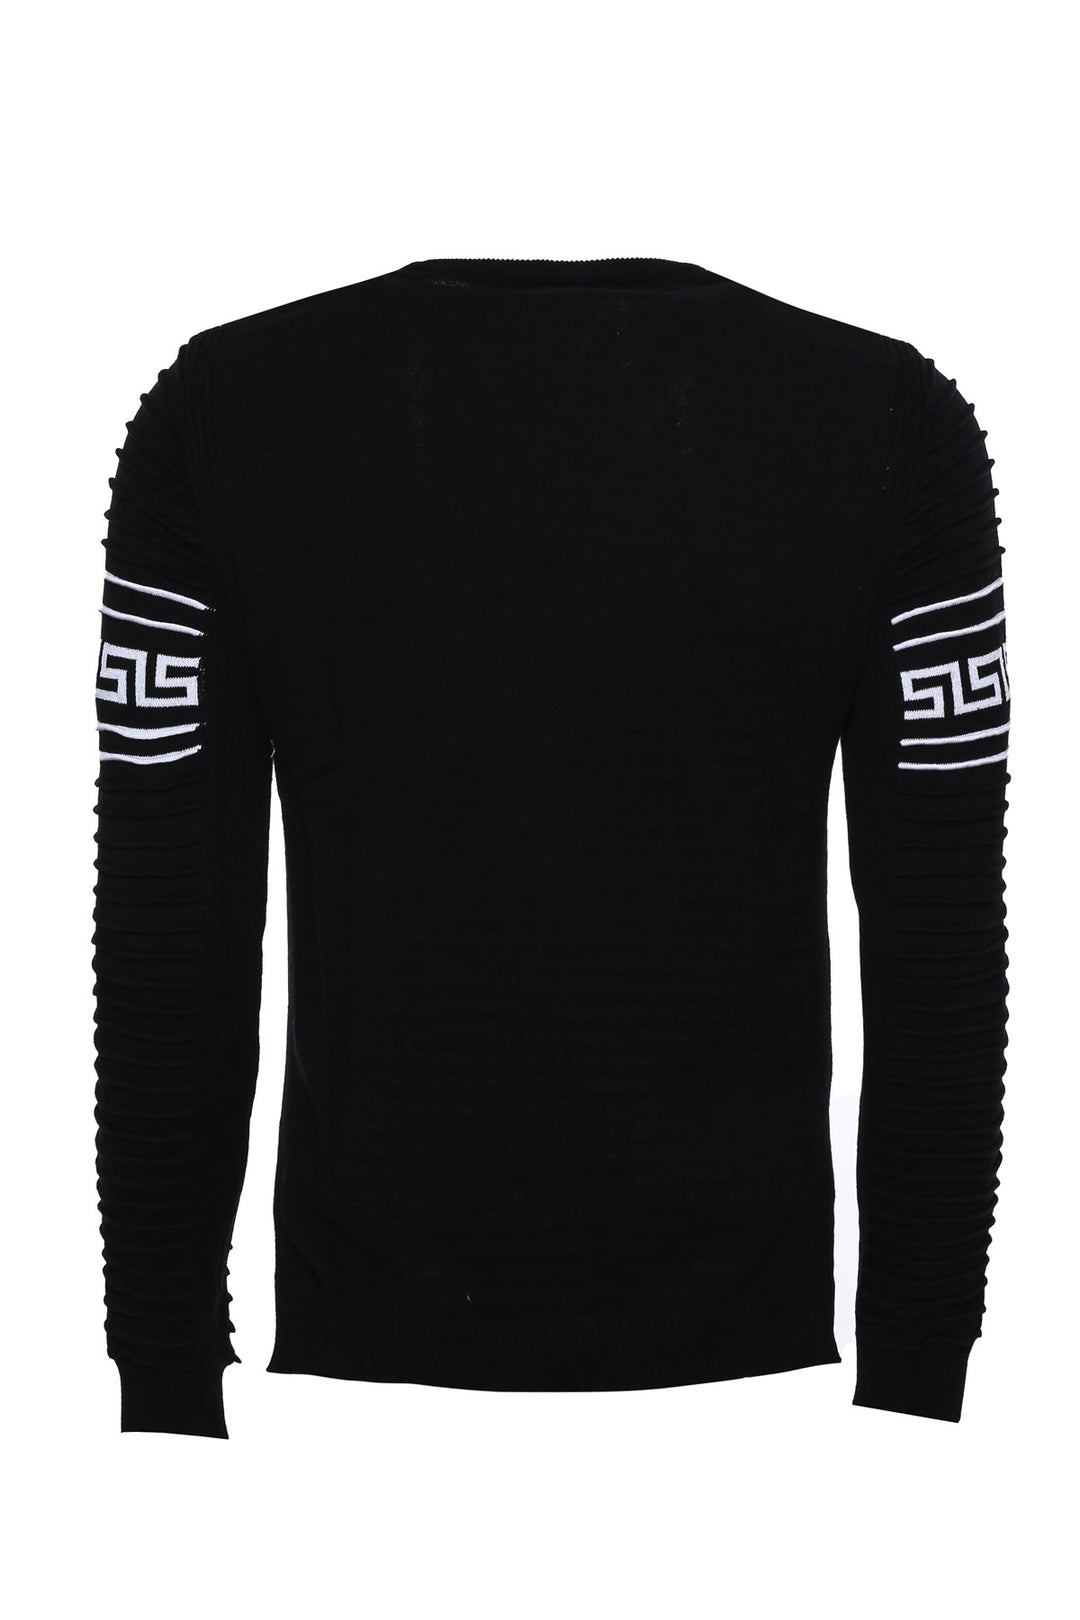 Crew Neck Knitwear Chest Patterned Over Black - Wessi